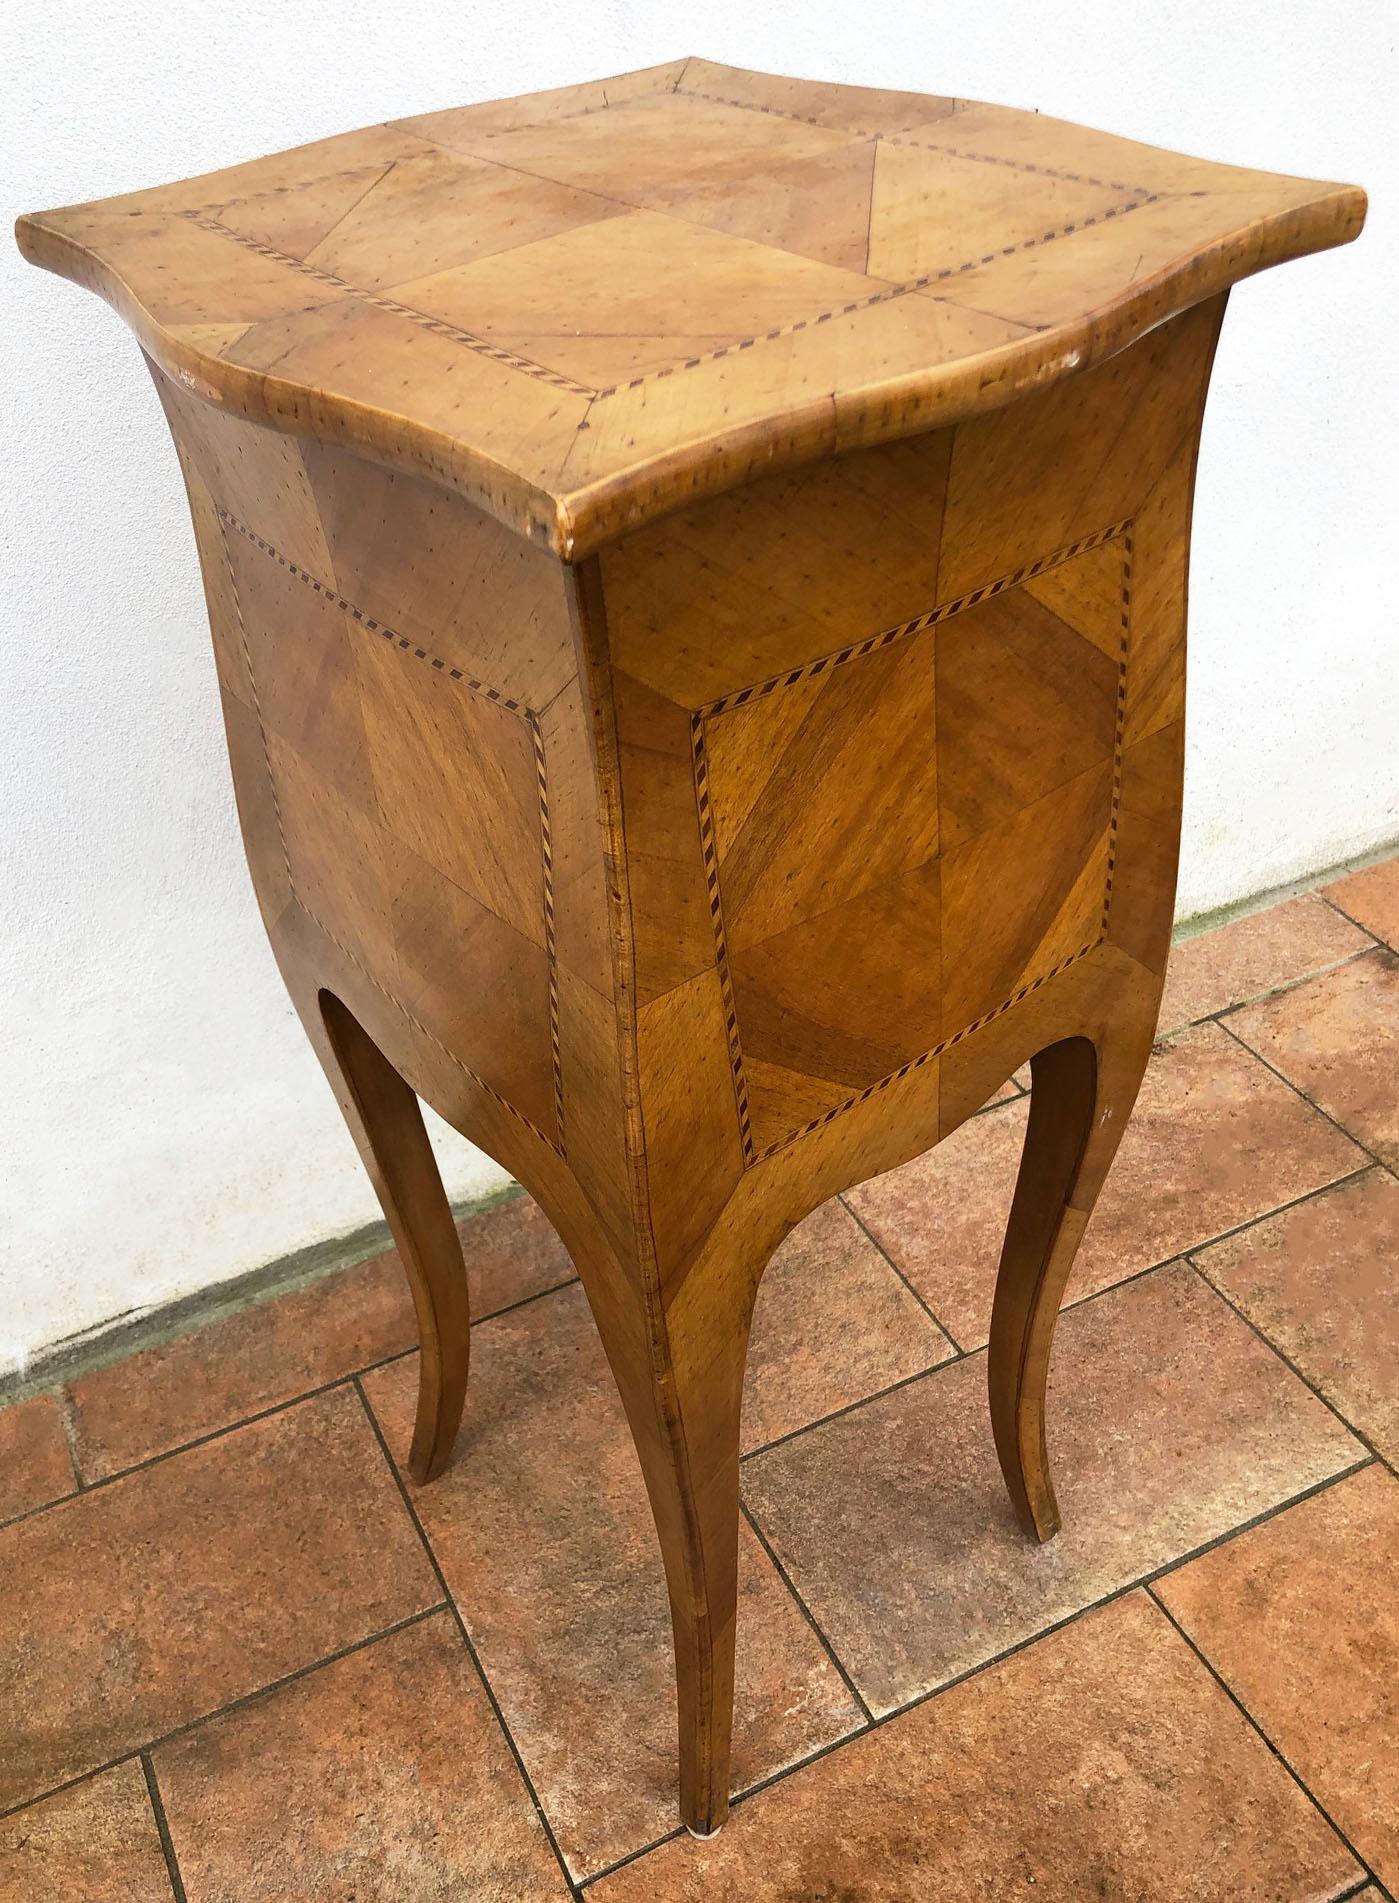 Country Walnut Veneered Nightstand, Inlaid 1970s Reproduction, with Three Drawers